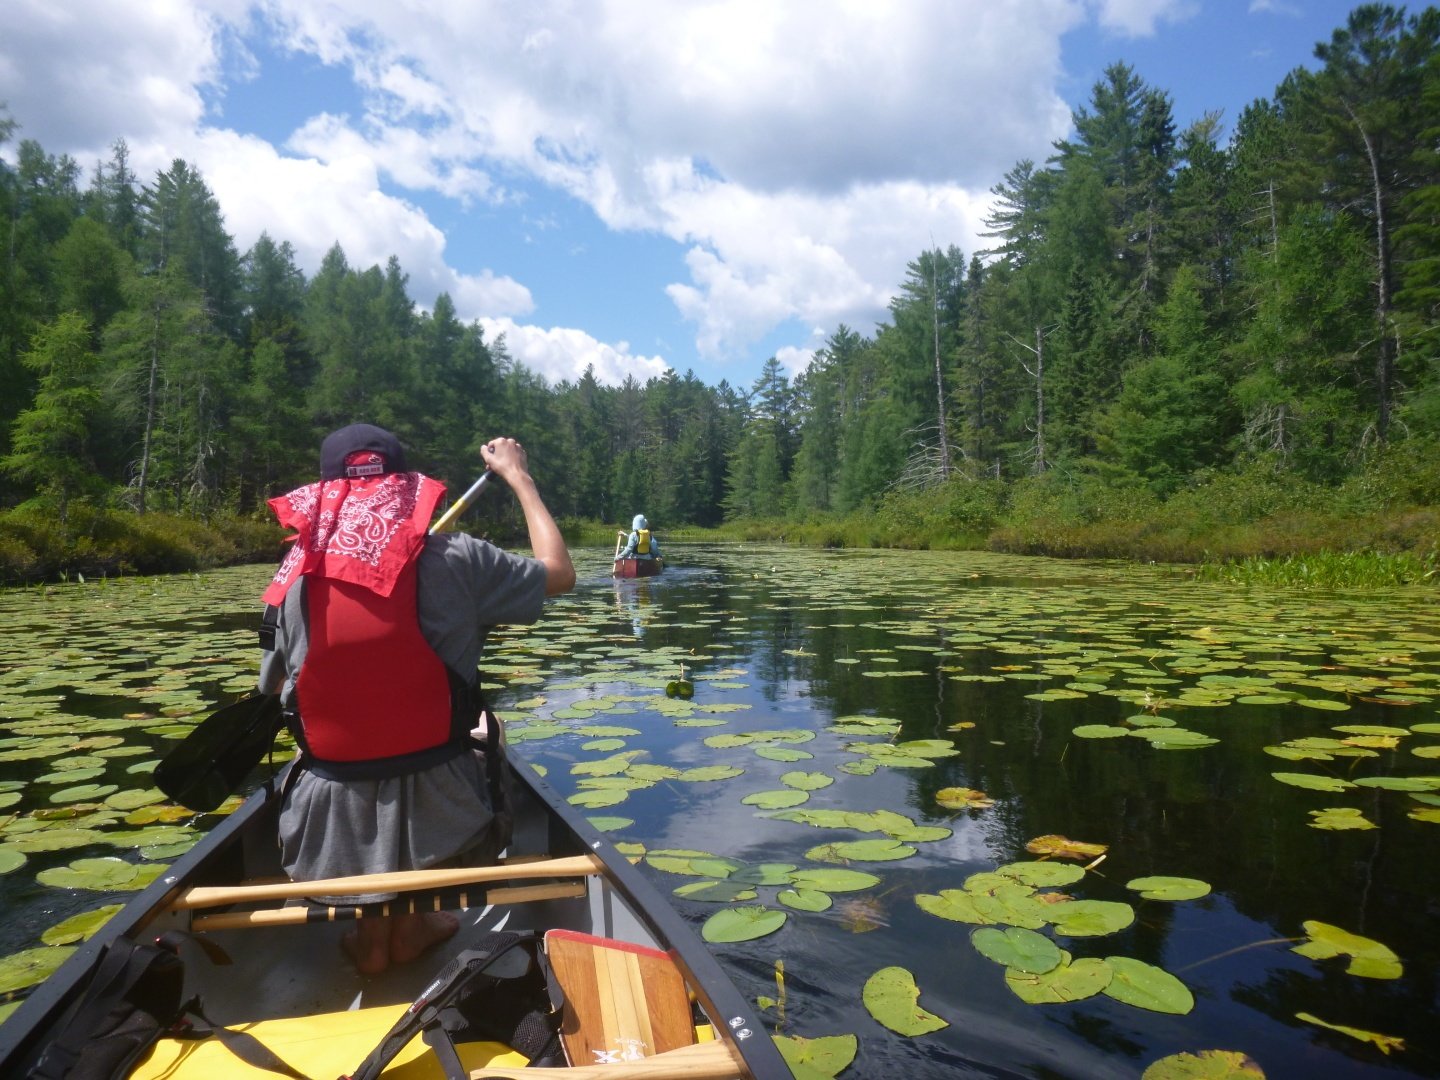 person sitting in the bow of a canoe wearing red bandana and life jacket while paddling through a lake full of lily pads